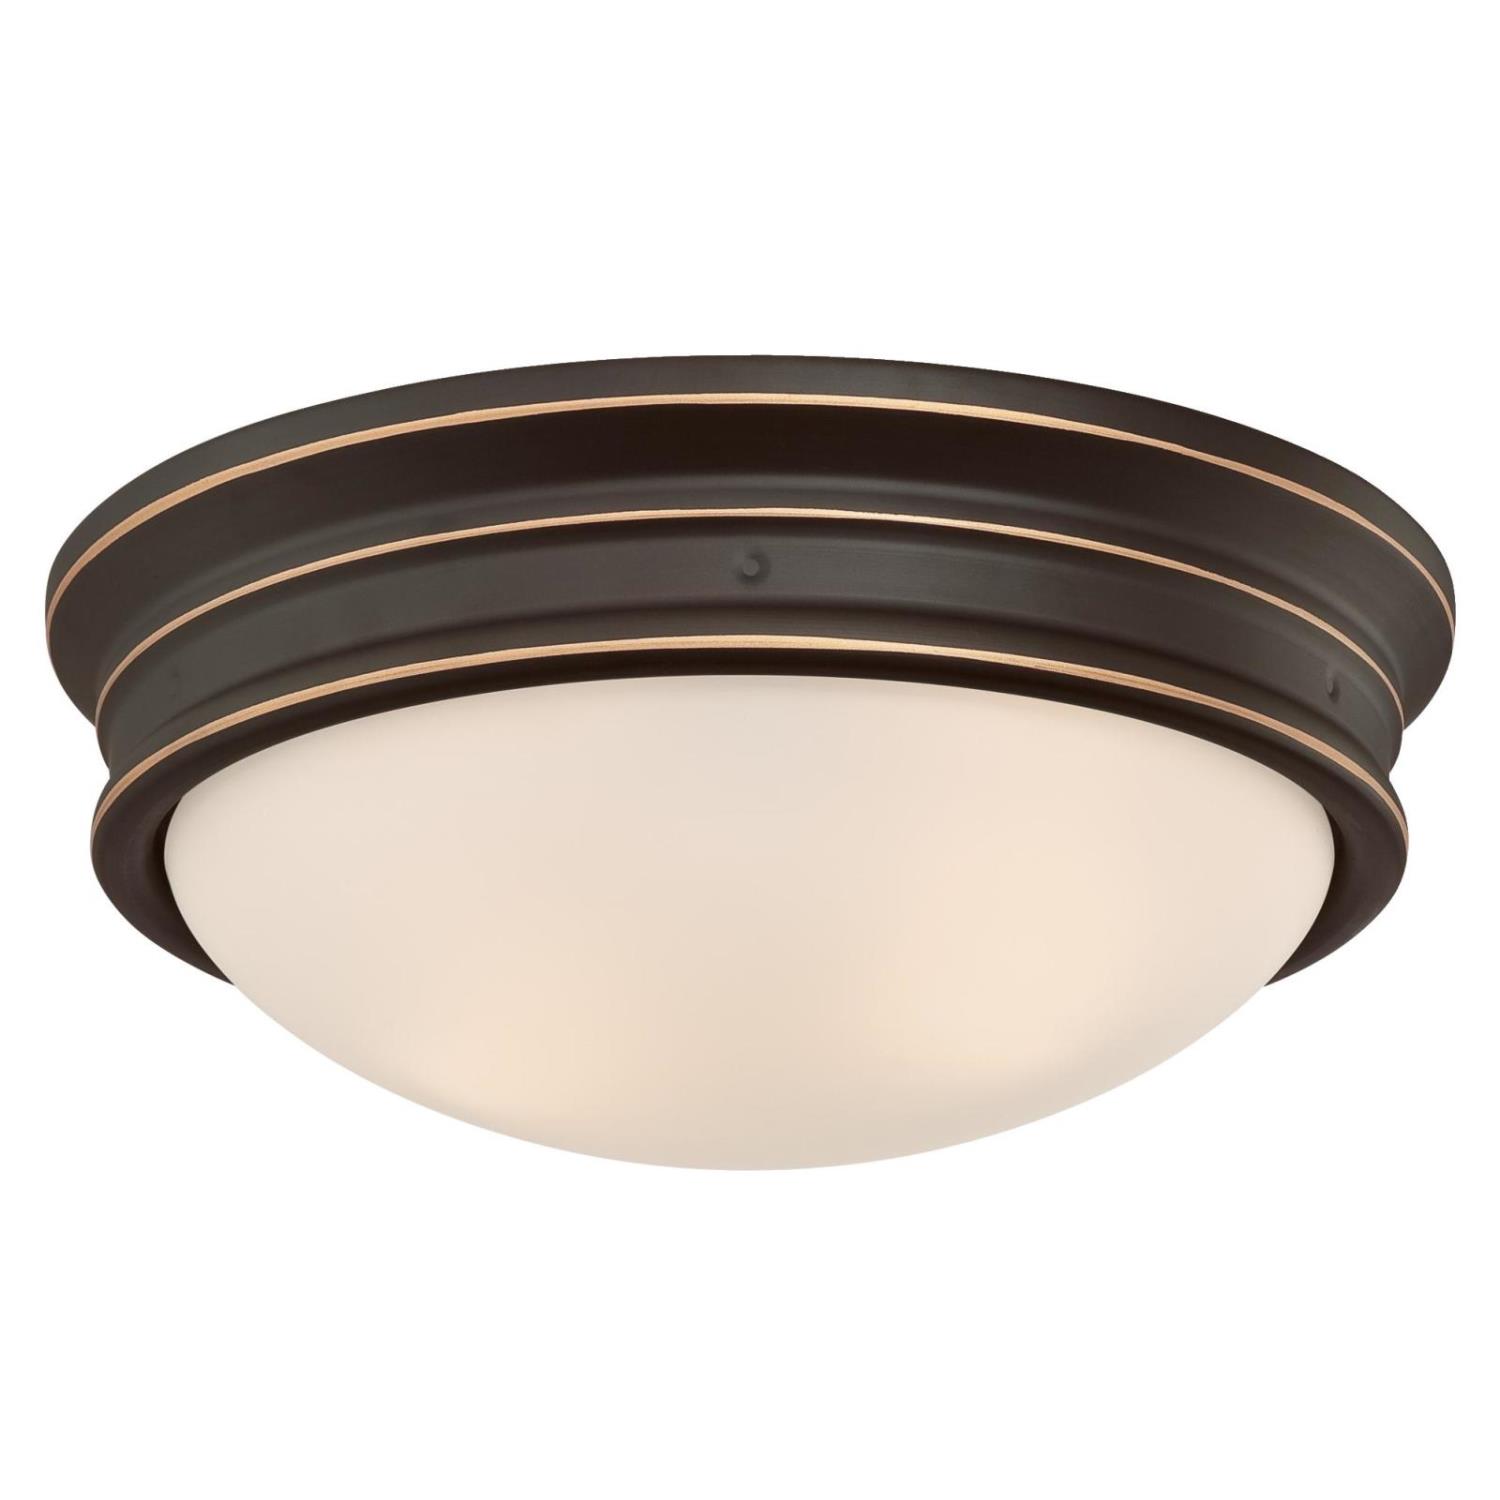 13 in. 2 Light Flush Oil Rubbed Bronze Finish with Highlights and Frosted Glass